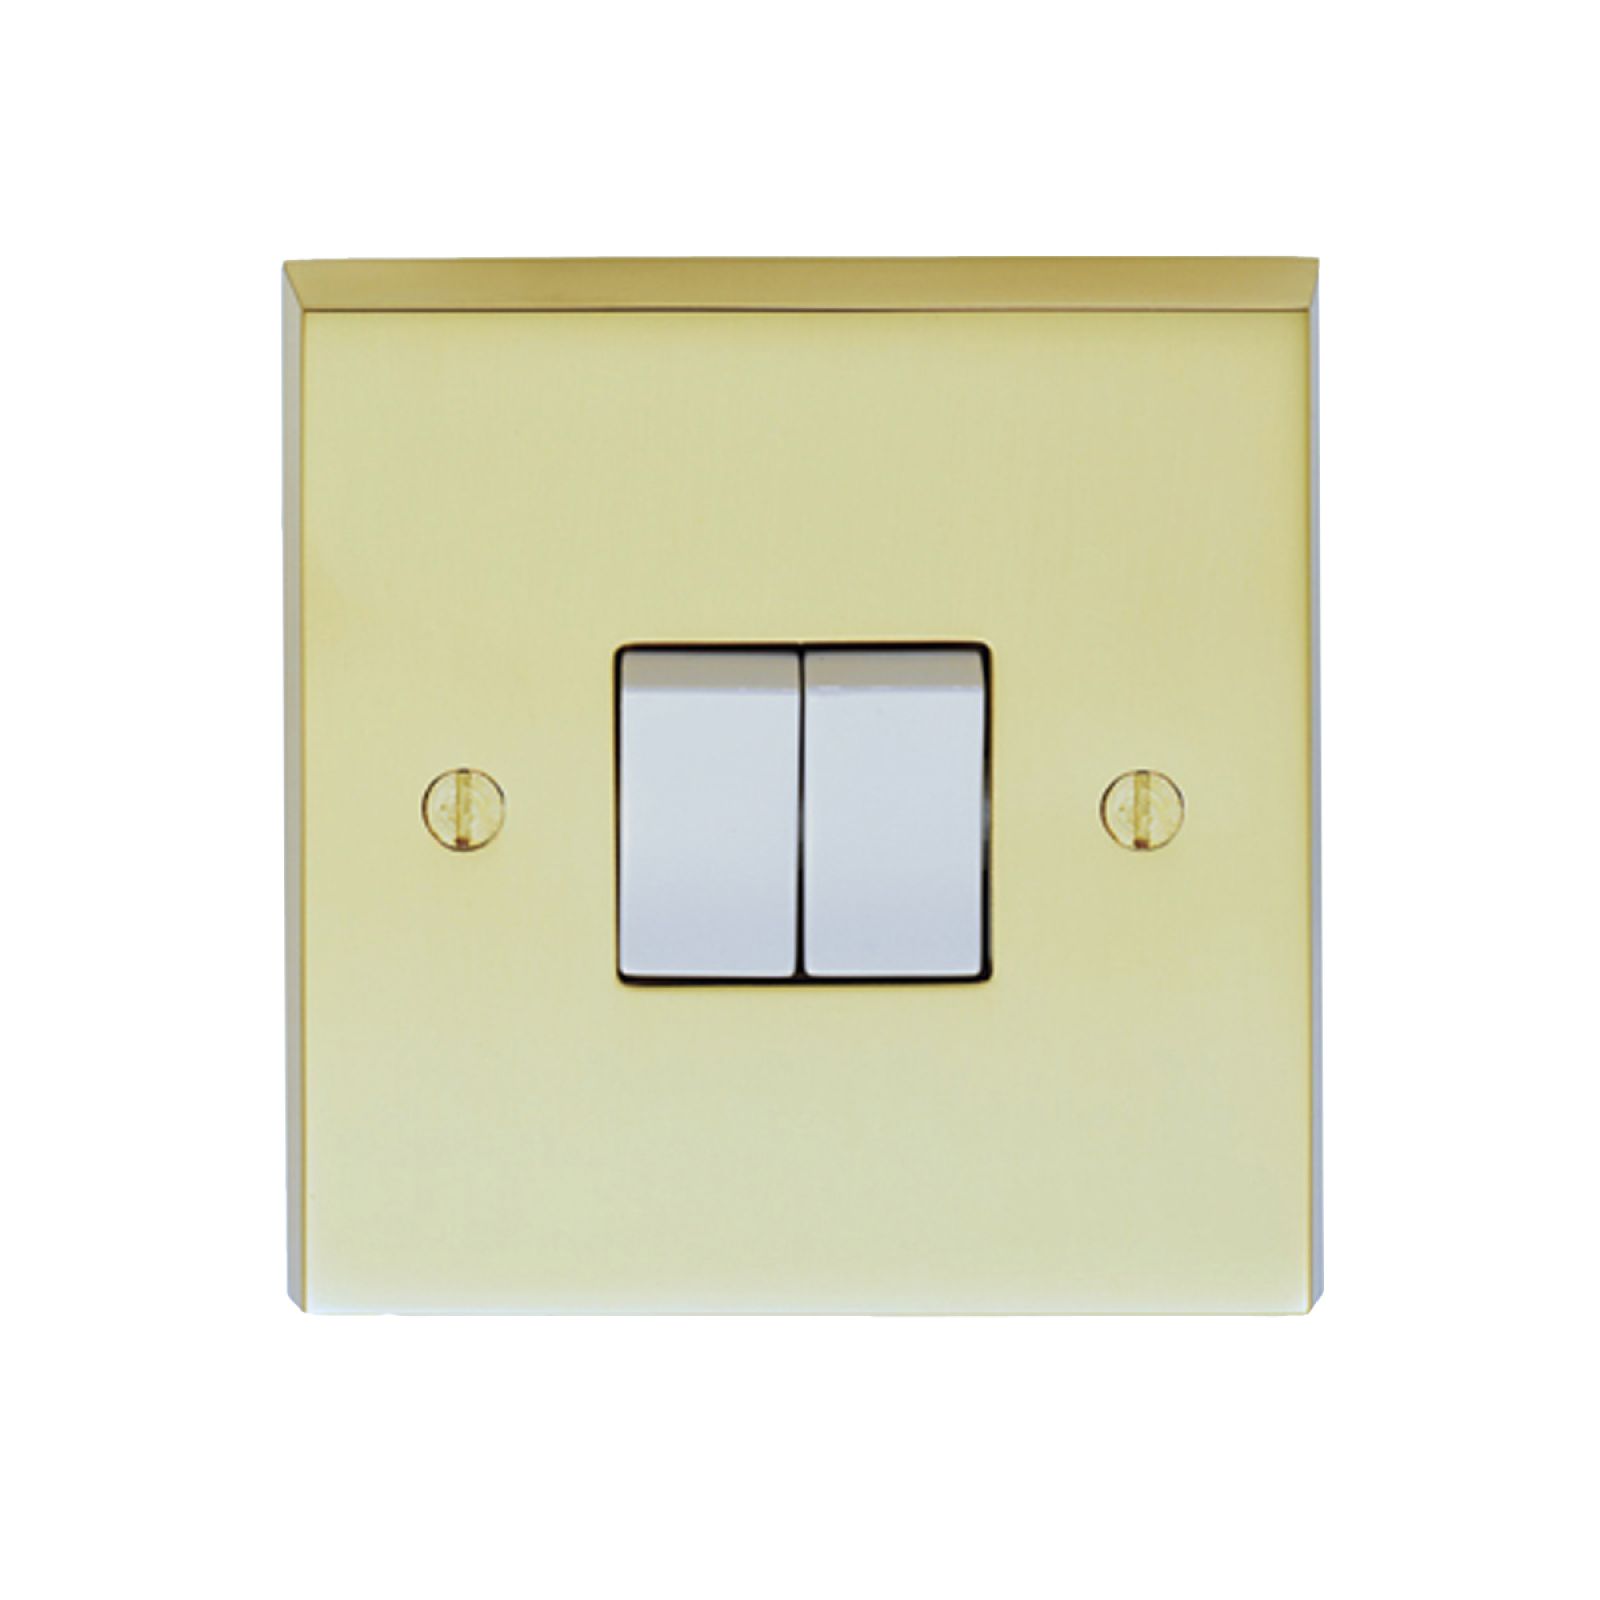 2 Gang 10amp 2way Switch in brass, chrome or satin chrome